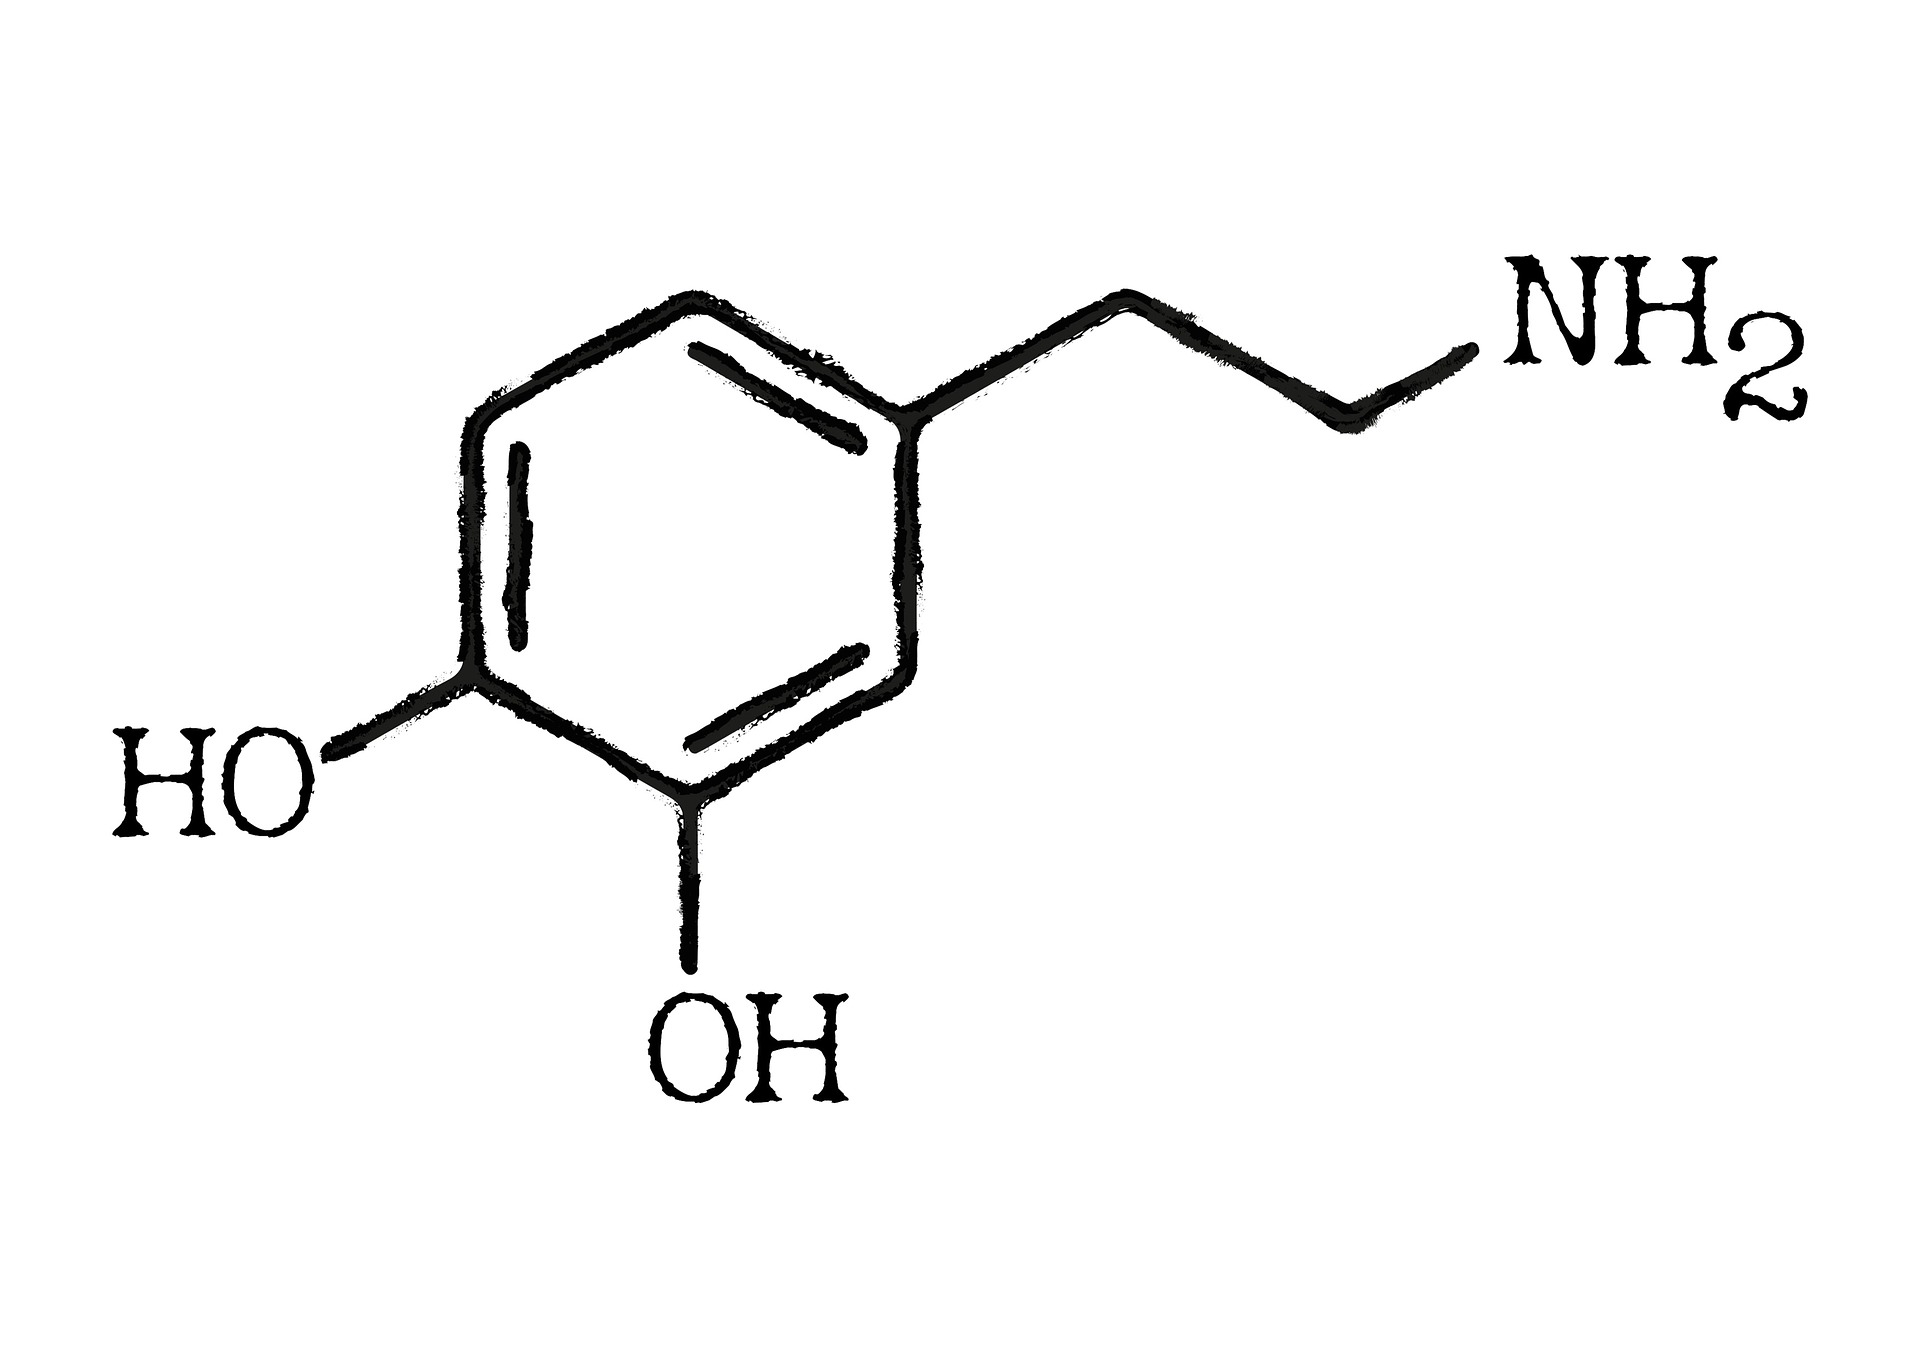 dopamine chemical structure